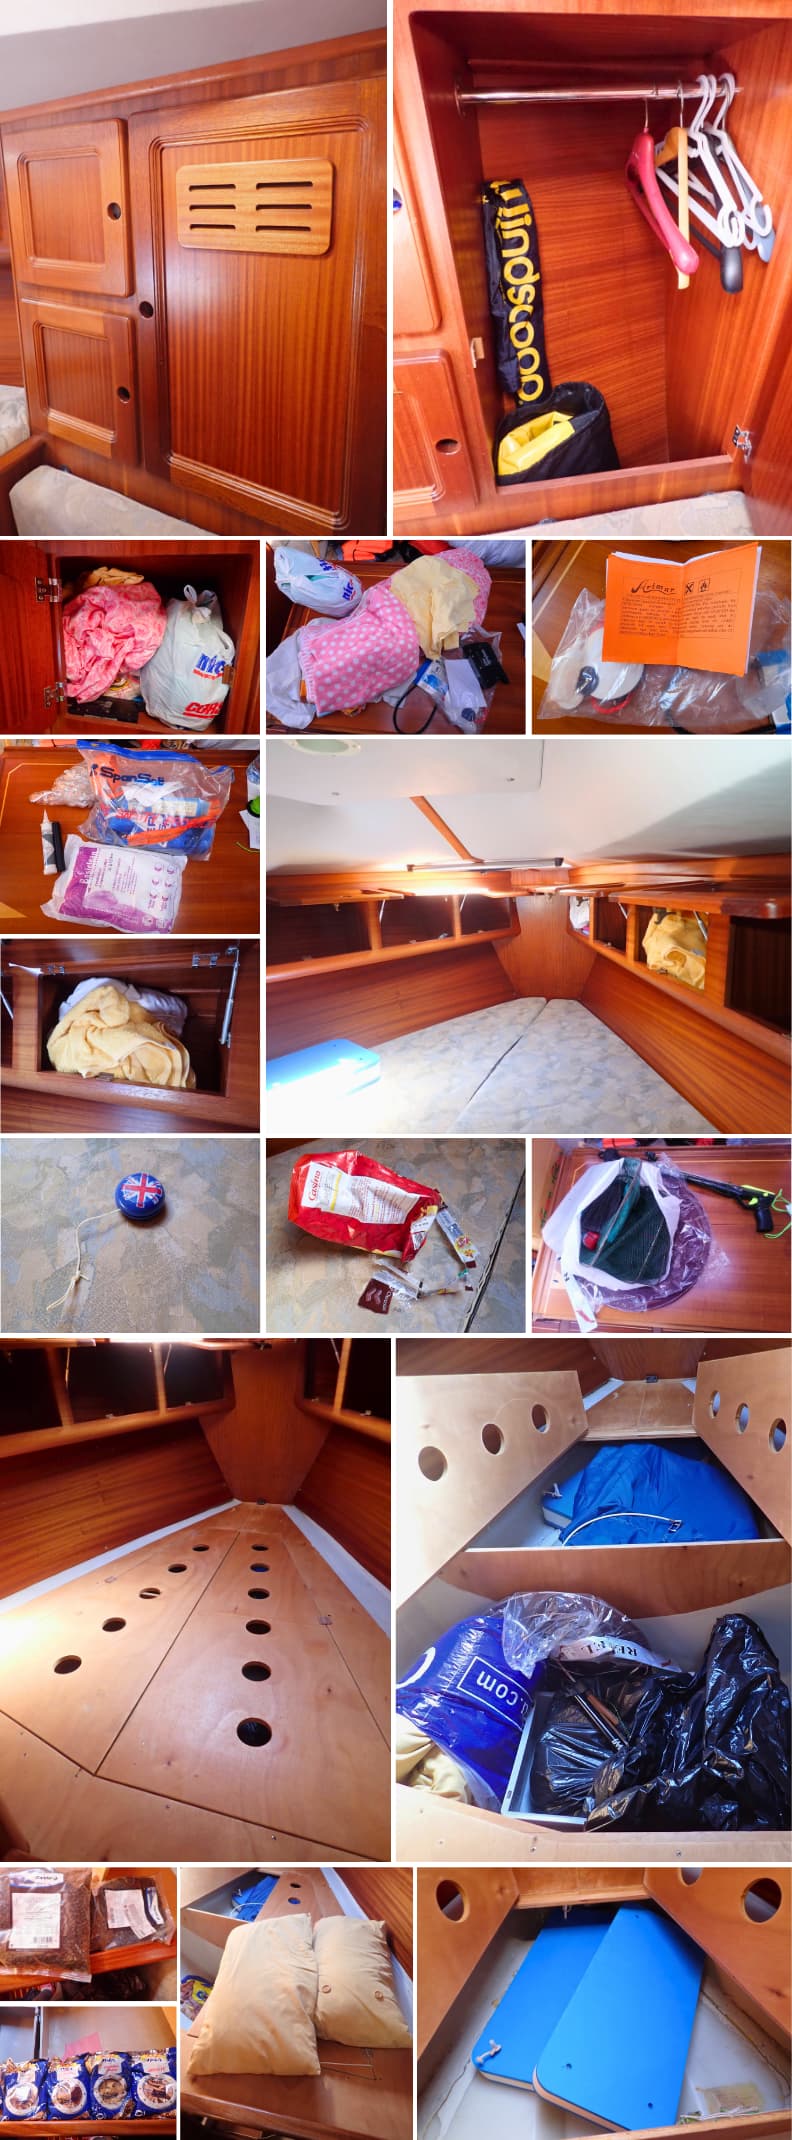 bow cabin boat inventory